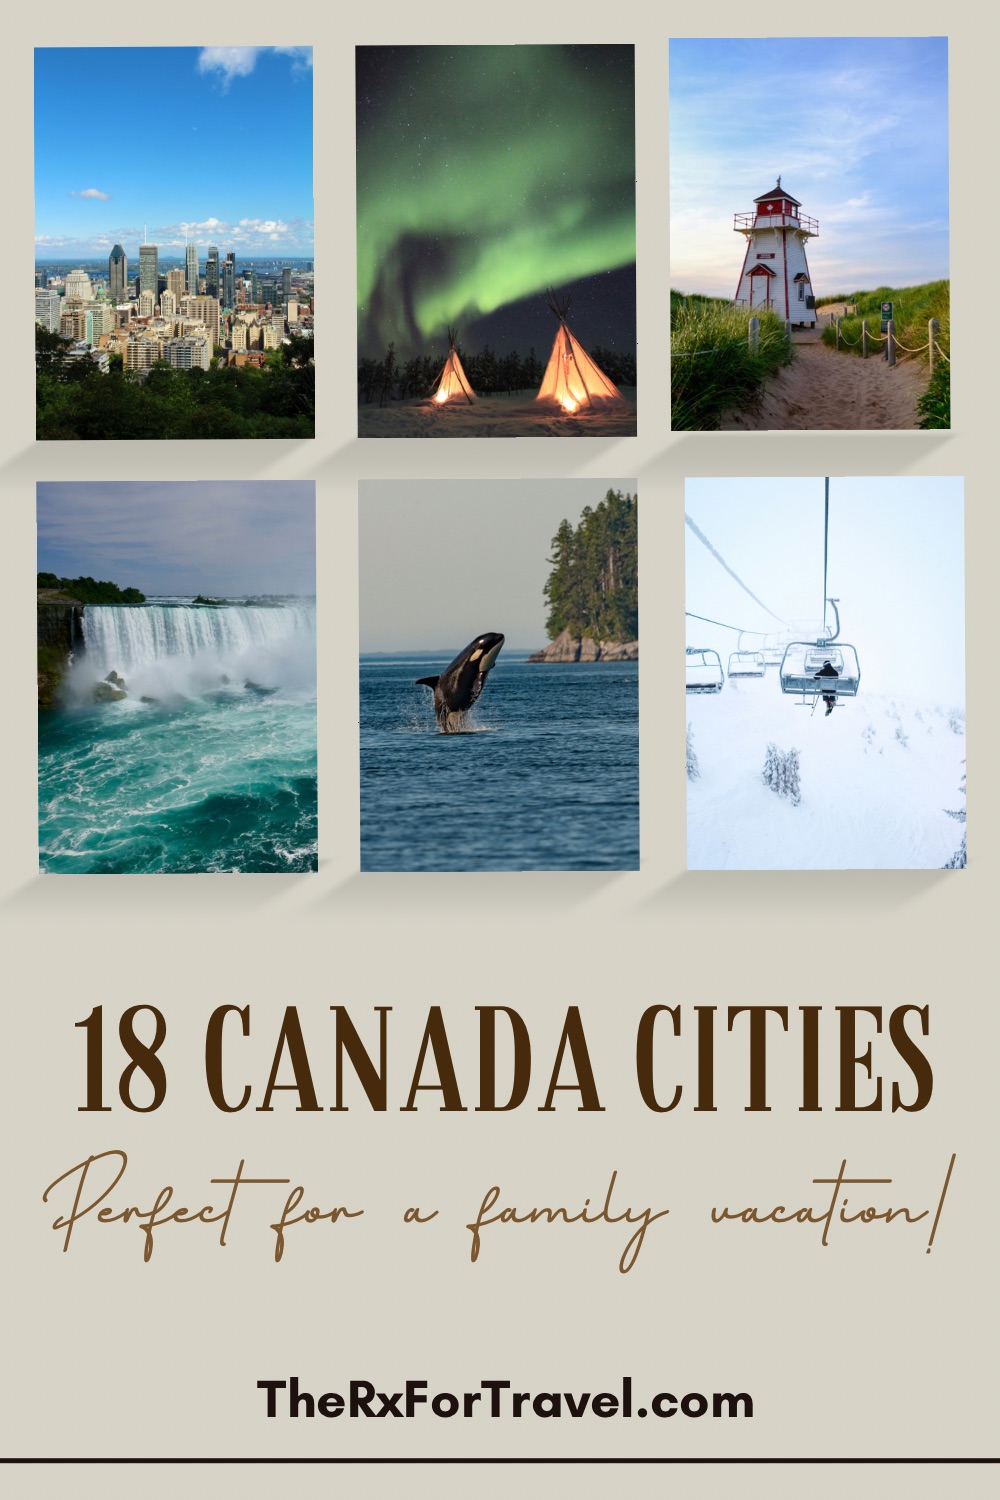 Pinterest pin of 18 Canada cities perfect for a family vacation